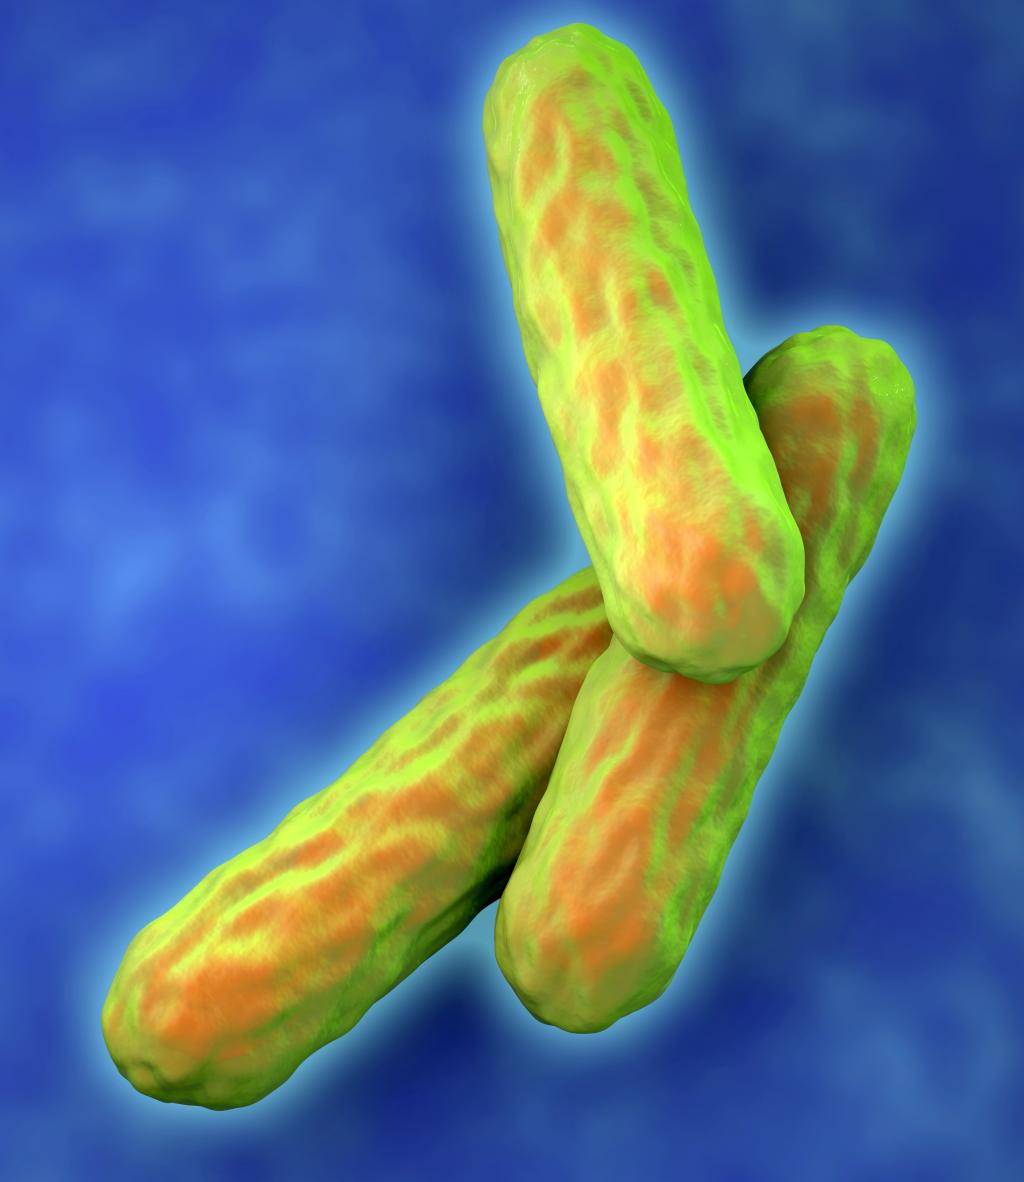 Tuberculosis bacteria. Computer artwork of Mycobacterium tuberculosis bacteria. These Gram- positive rod-shaped bacteria cause the disease tuberculosis. They infect the lungs creating primary tubercles, nodular lesions of dead tissue and bacteria.